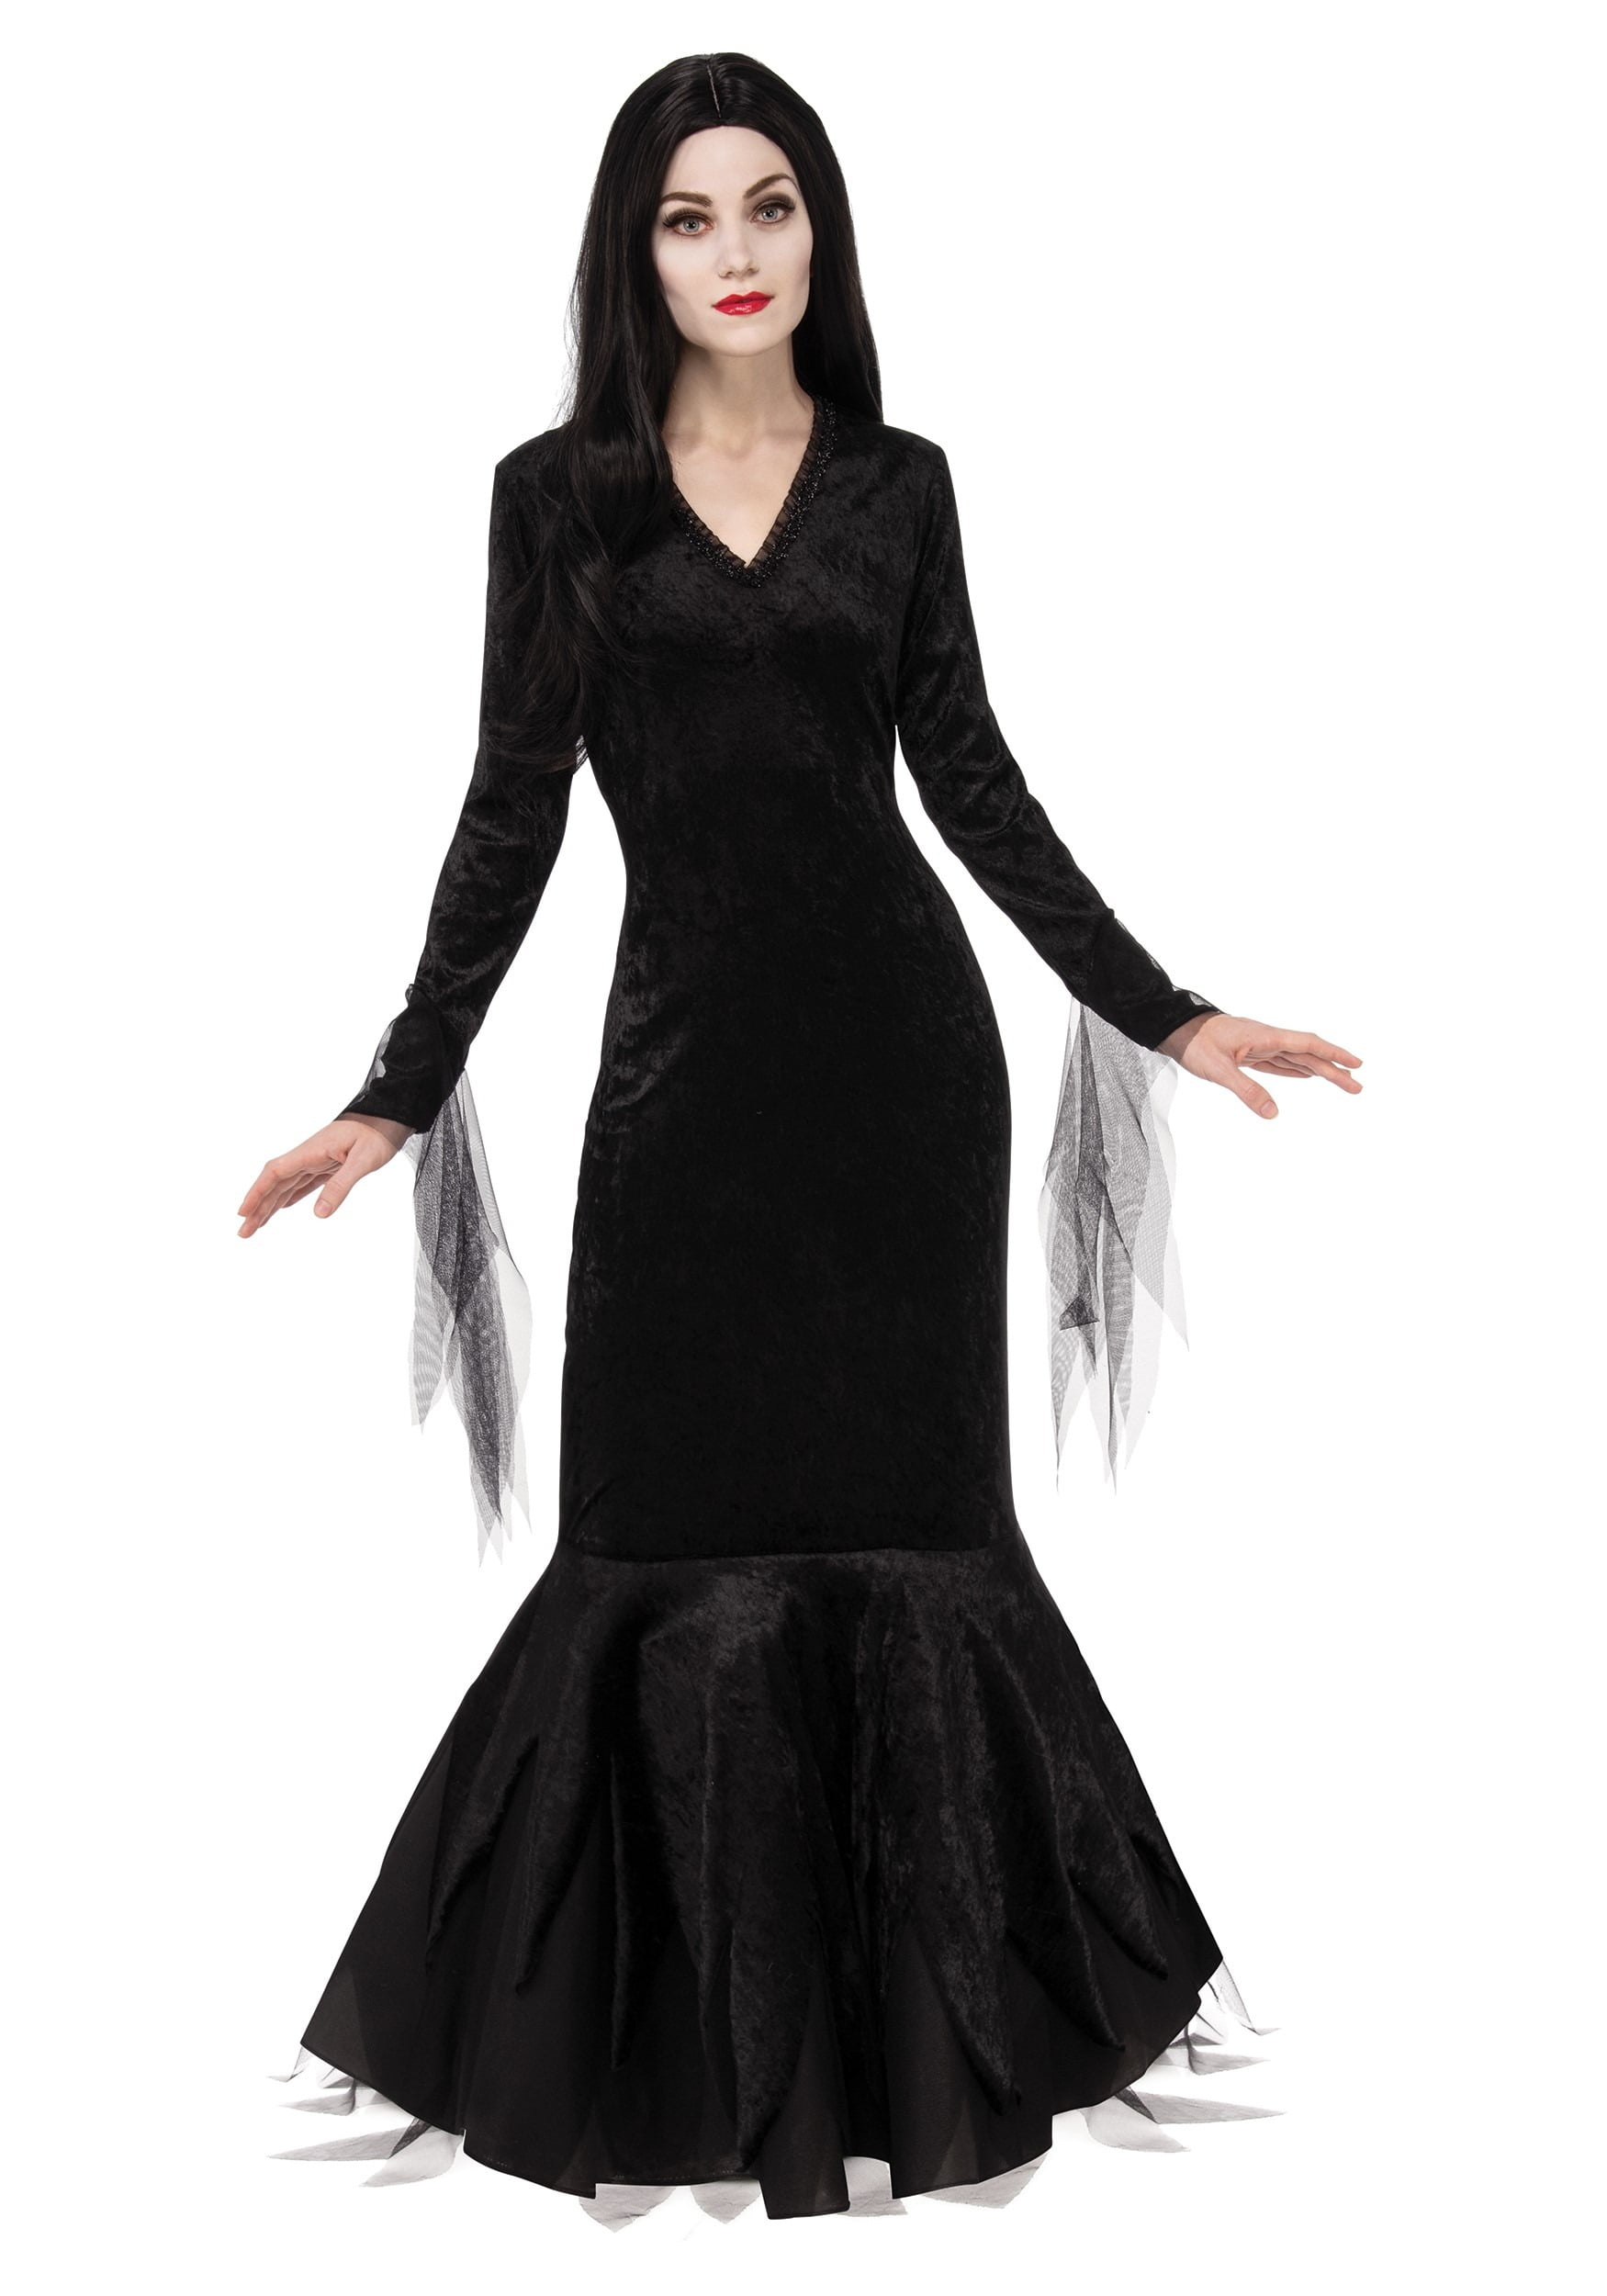 Childrens Mortisia Fancy Dress Costume Addams Family Halloween Outfit 158Cm 